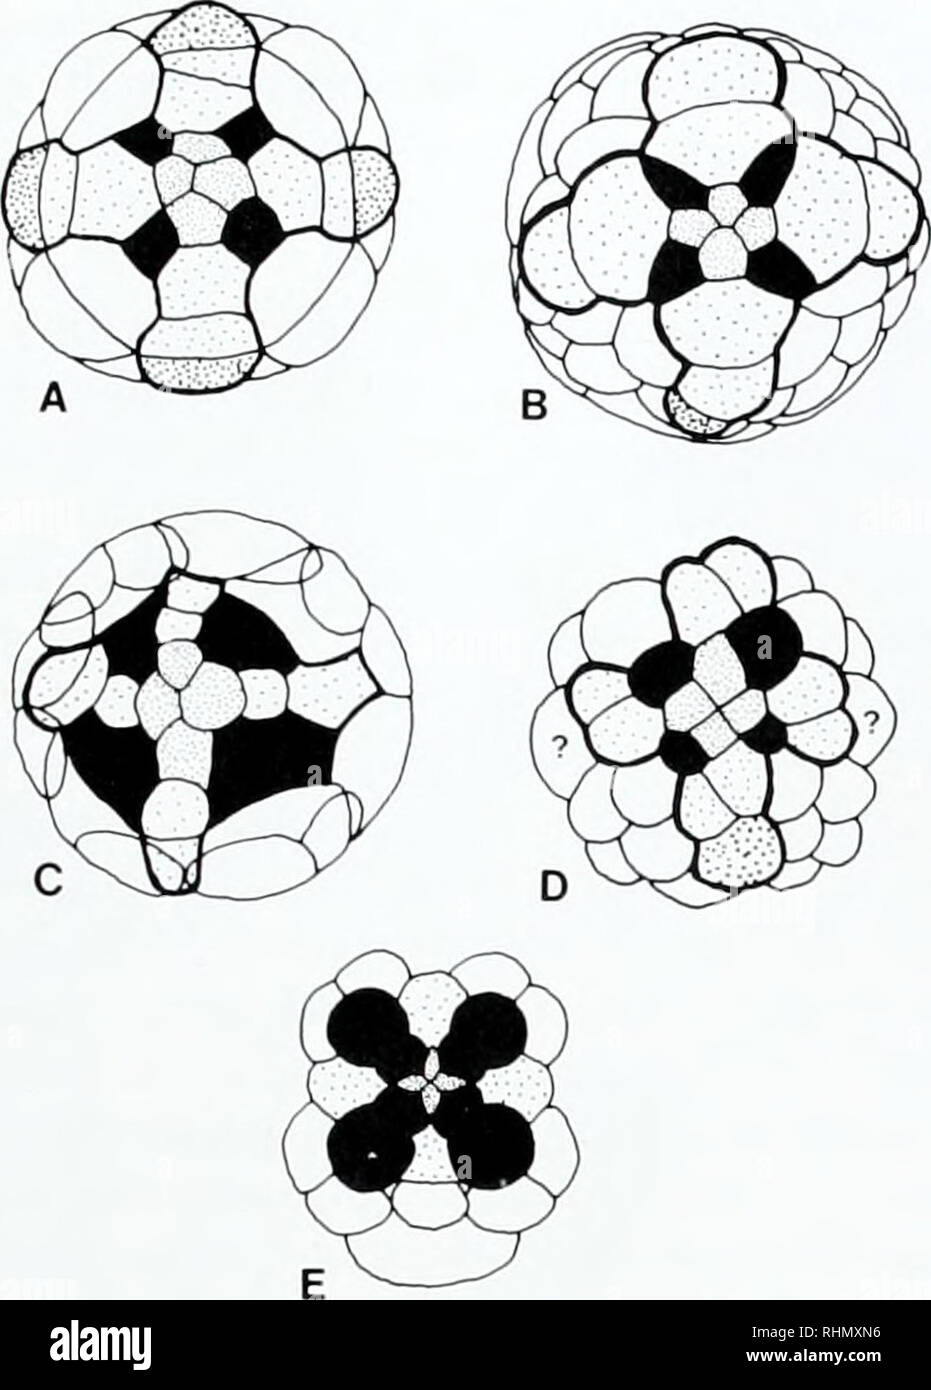 . The Biological bulletin. Biology; Zoology; Biology; Marine Biology. APLACOPHORA: PROGENETIC COELOMATES 59. Figure 1. (A-D) The molluscan cross. (A) Gastropoda (Lyniiiucu siagnalis. after Verdonk and van den Biggelaar. 1983, p. 111 fig. 3b); (B) Polyplacophora (Stenoplax heathiana. after Heath, 1899. pi. 32, fig. 23); (C) Sipuncula (Golfingia vulgaris. after Gerould, 1906. p. 99, fig. D, as published in Rice, 1975, p. 99. fig. 17); (D) Aplacophora (Epimenia verrucosa. after Baba, 1951. p. 46, fig. 18). The apical rosette la'&quot;-ld'&quot; is shown in fine, close stippling; arms of the cross Stock Photo